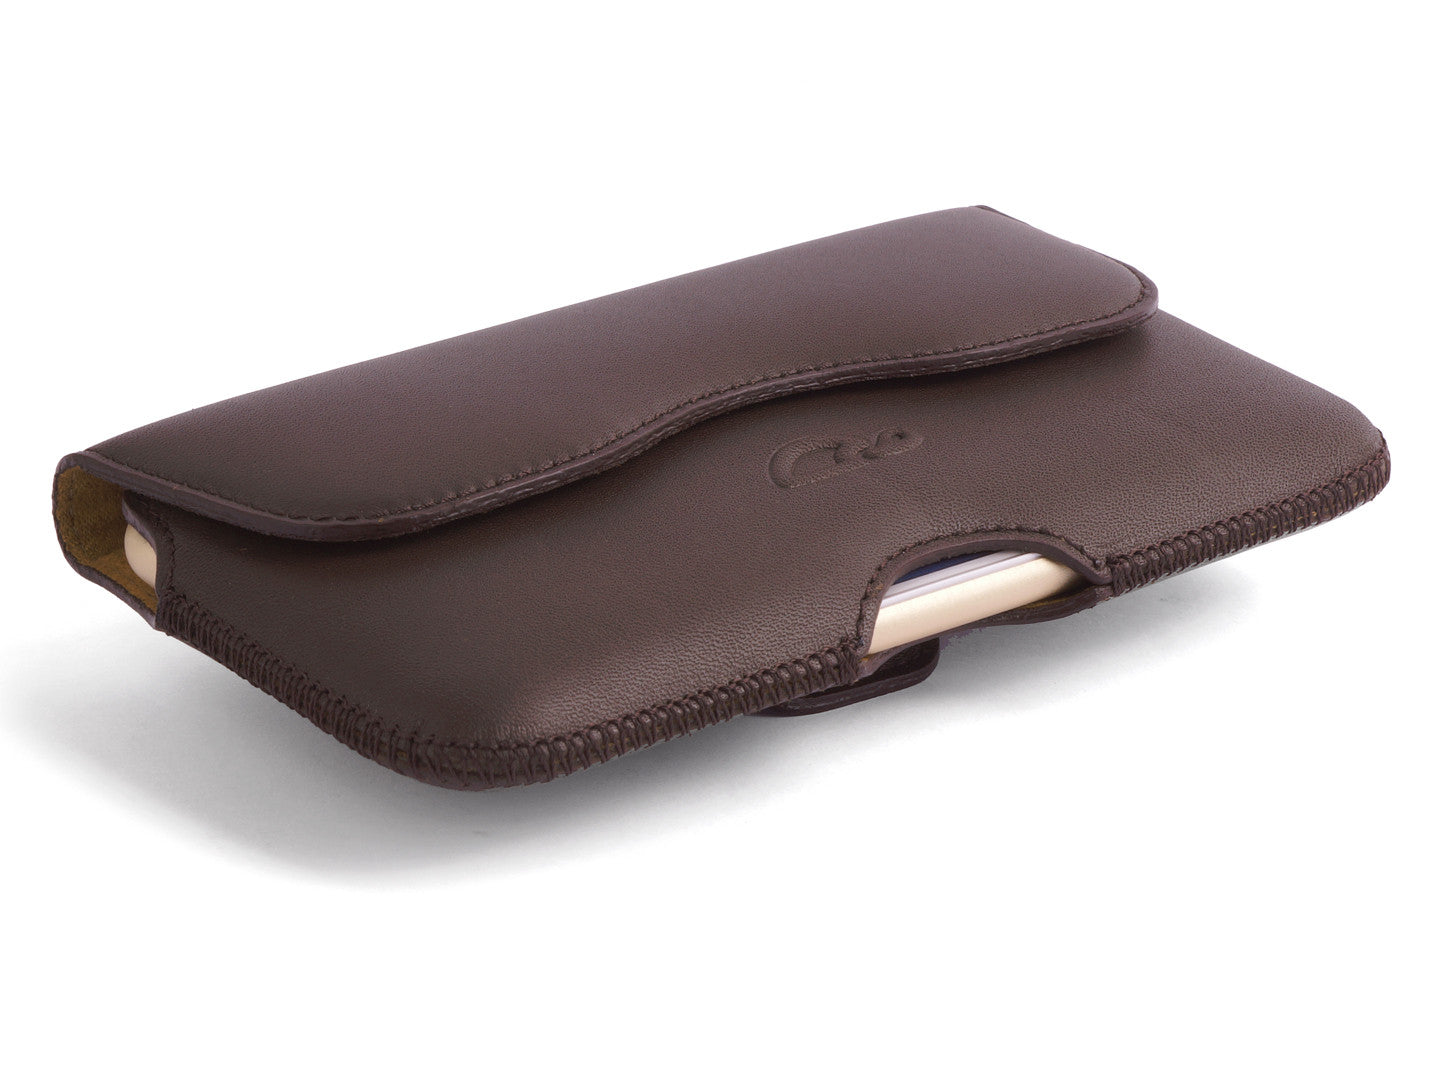 iPhone 6 Leather Belt Case brown - MONTE CARLO - Carapaz